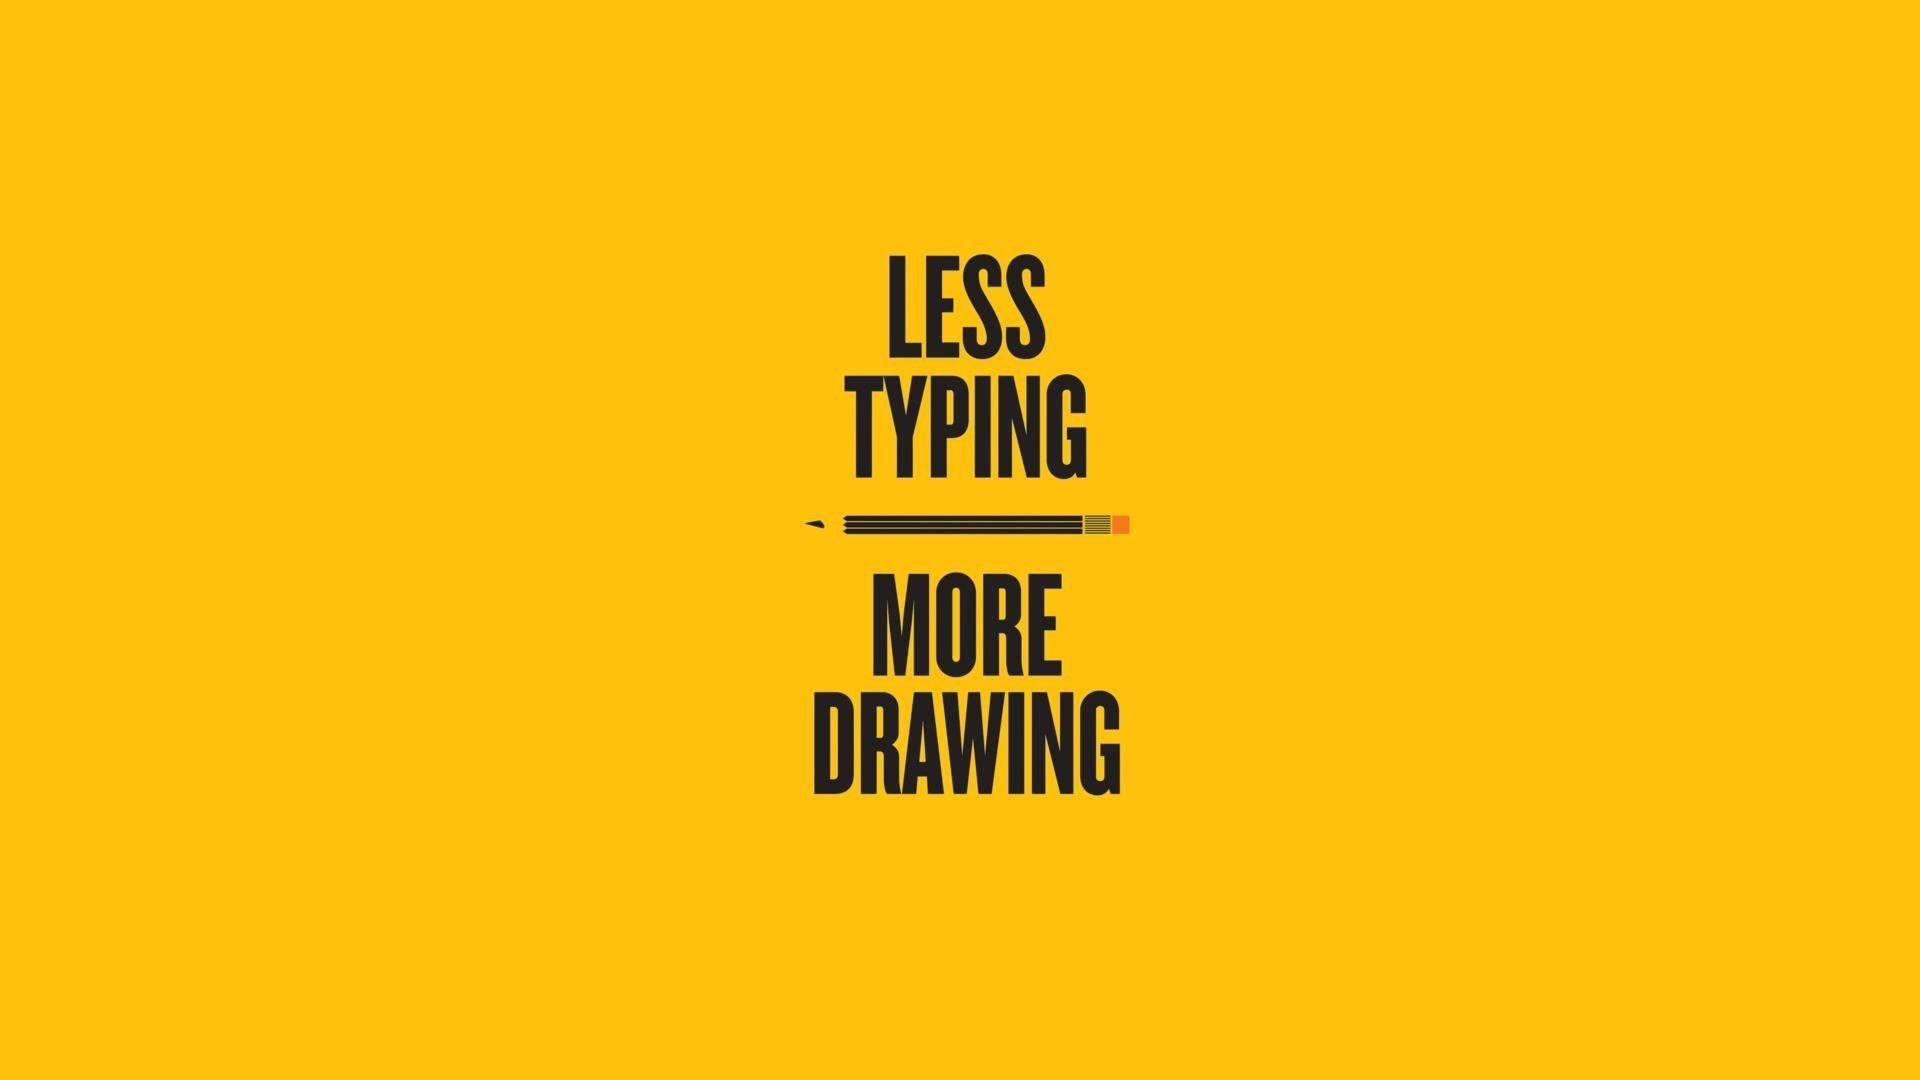 Typing drawings pencils text typography wallpaper